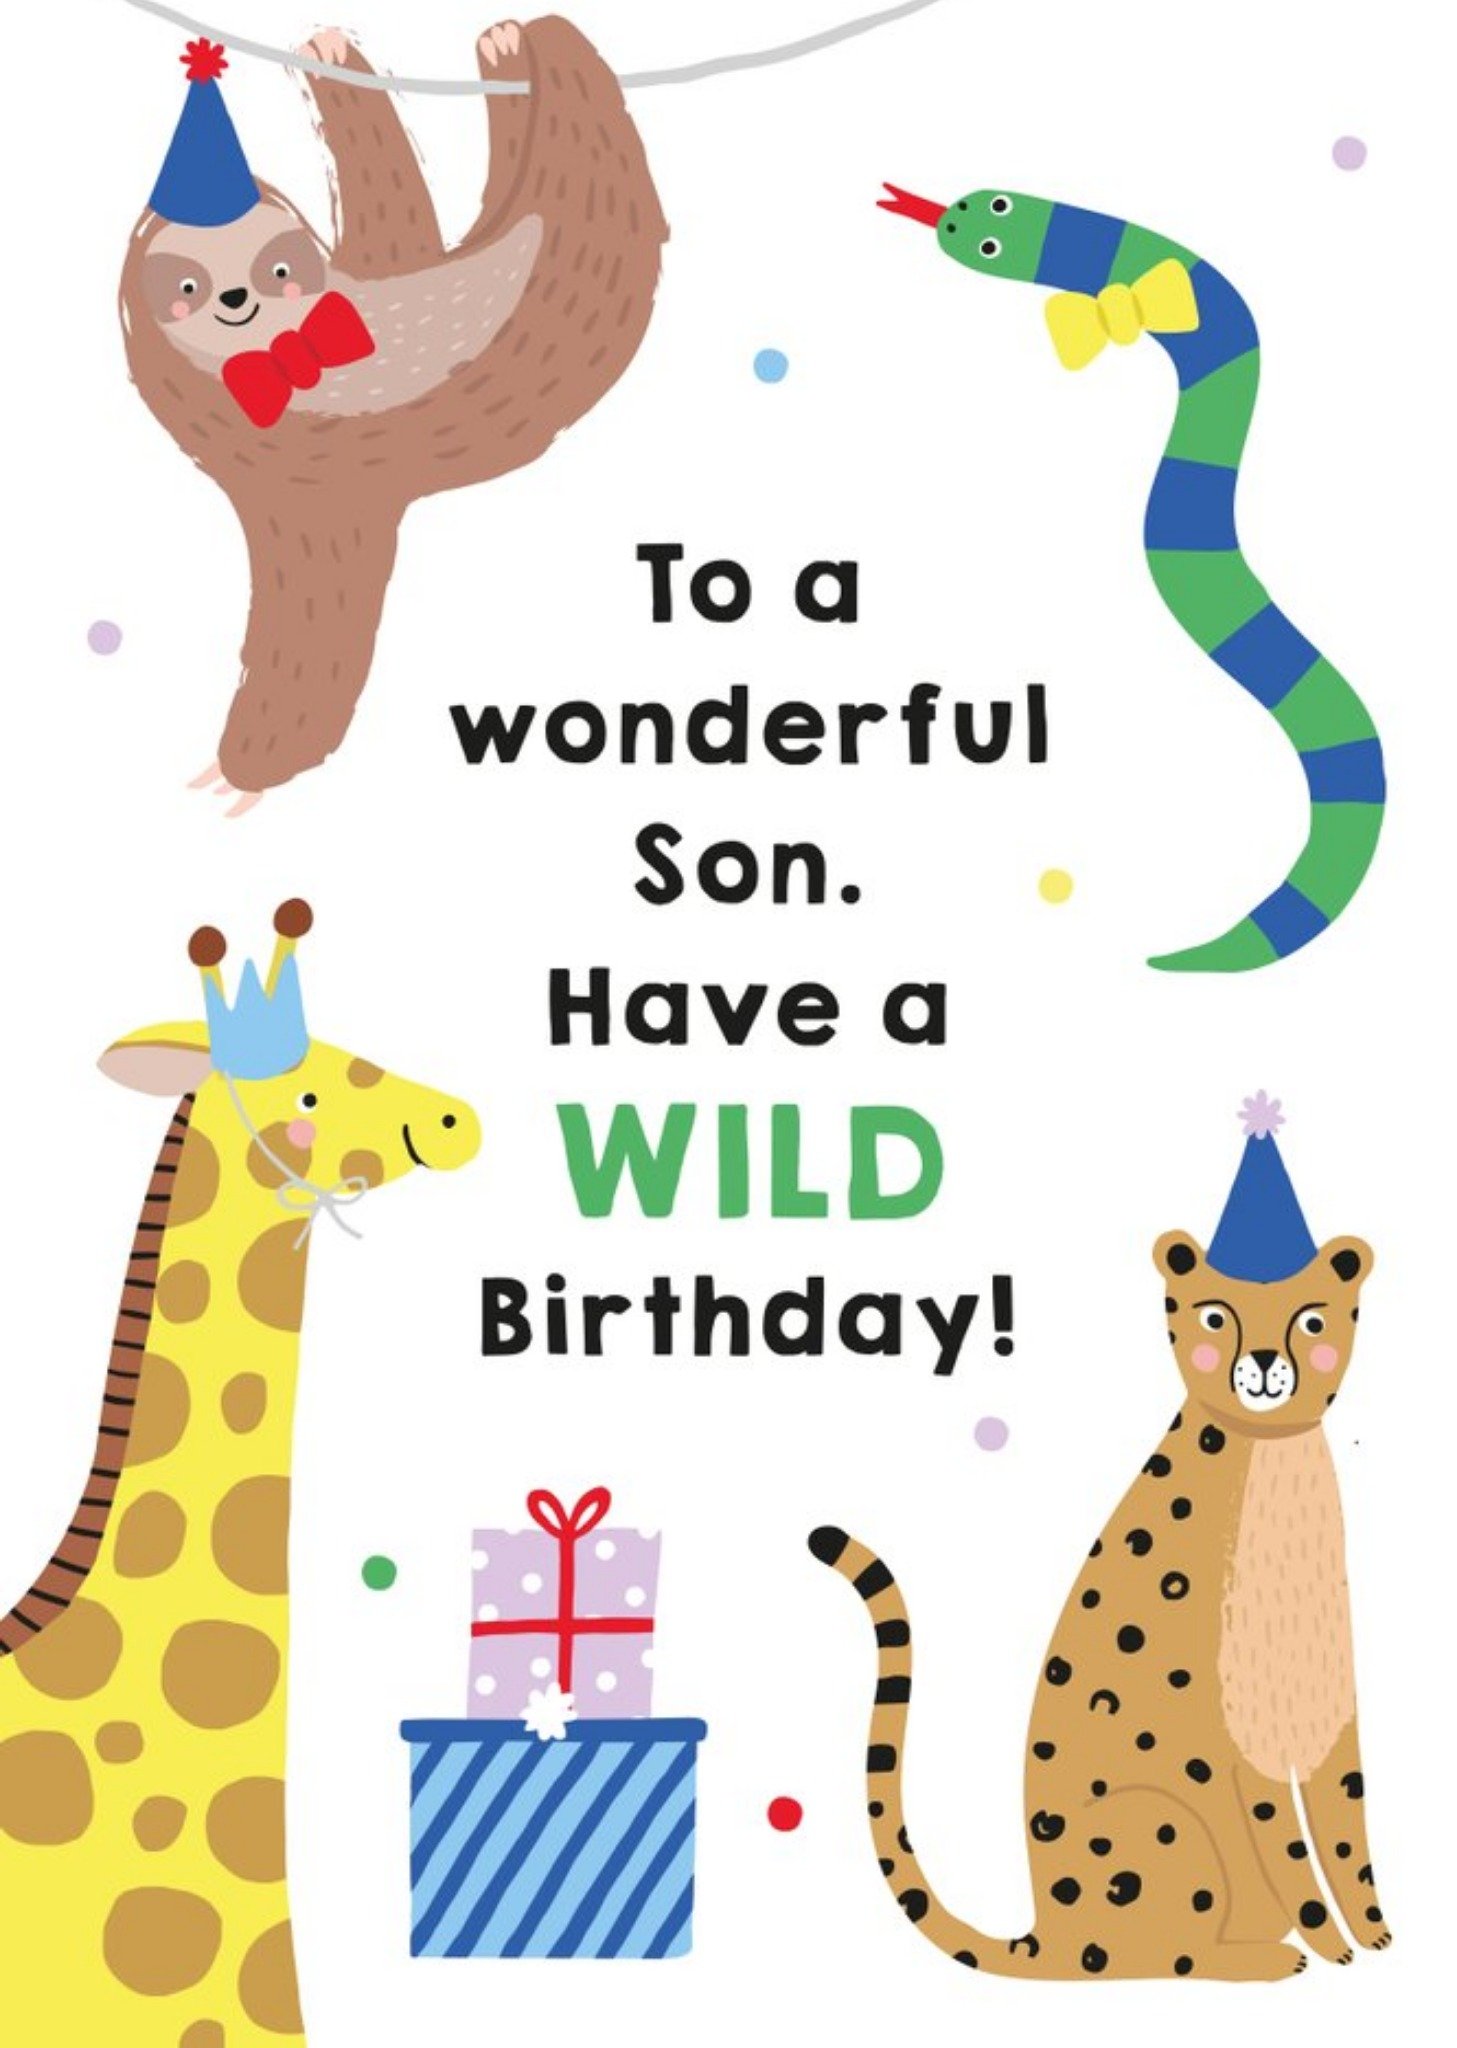 Moonpig Illustrated Cute Party Animals To A Wonderful Son Have A Wild Birthday Card Ecard